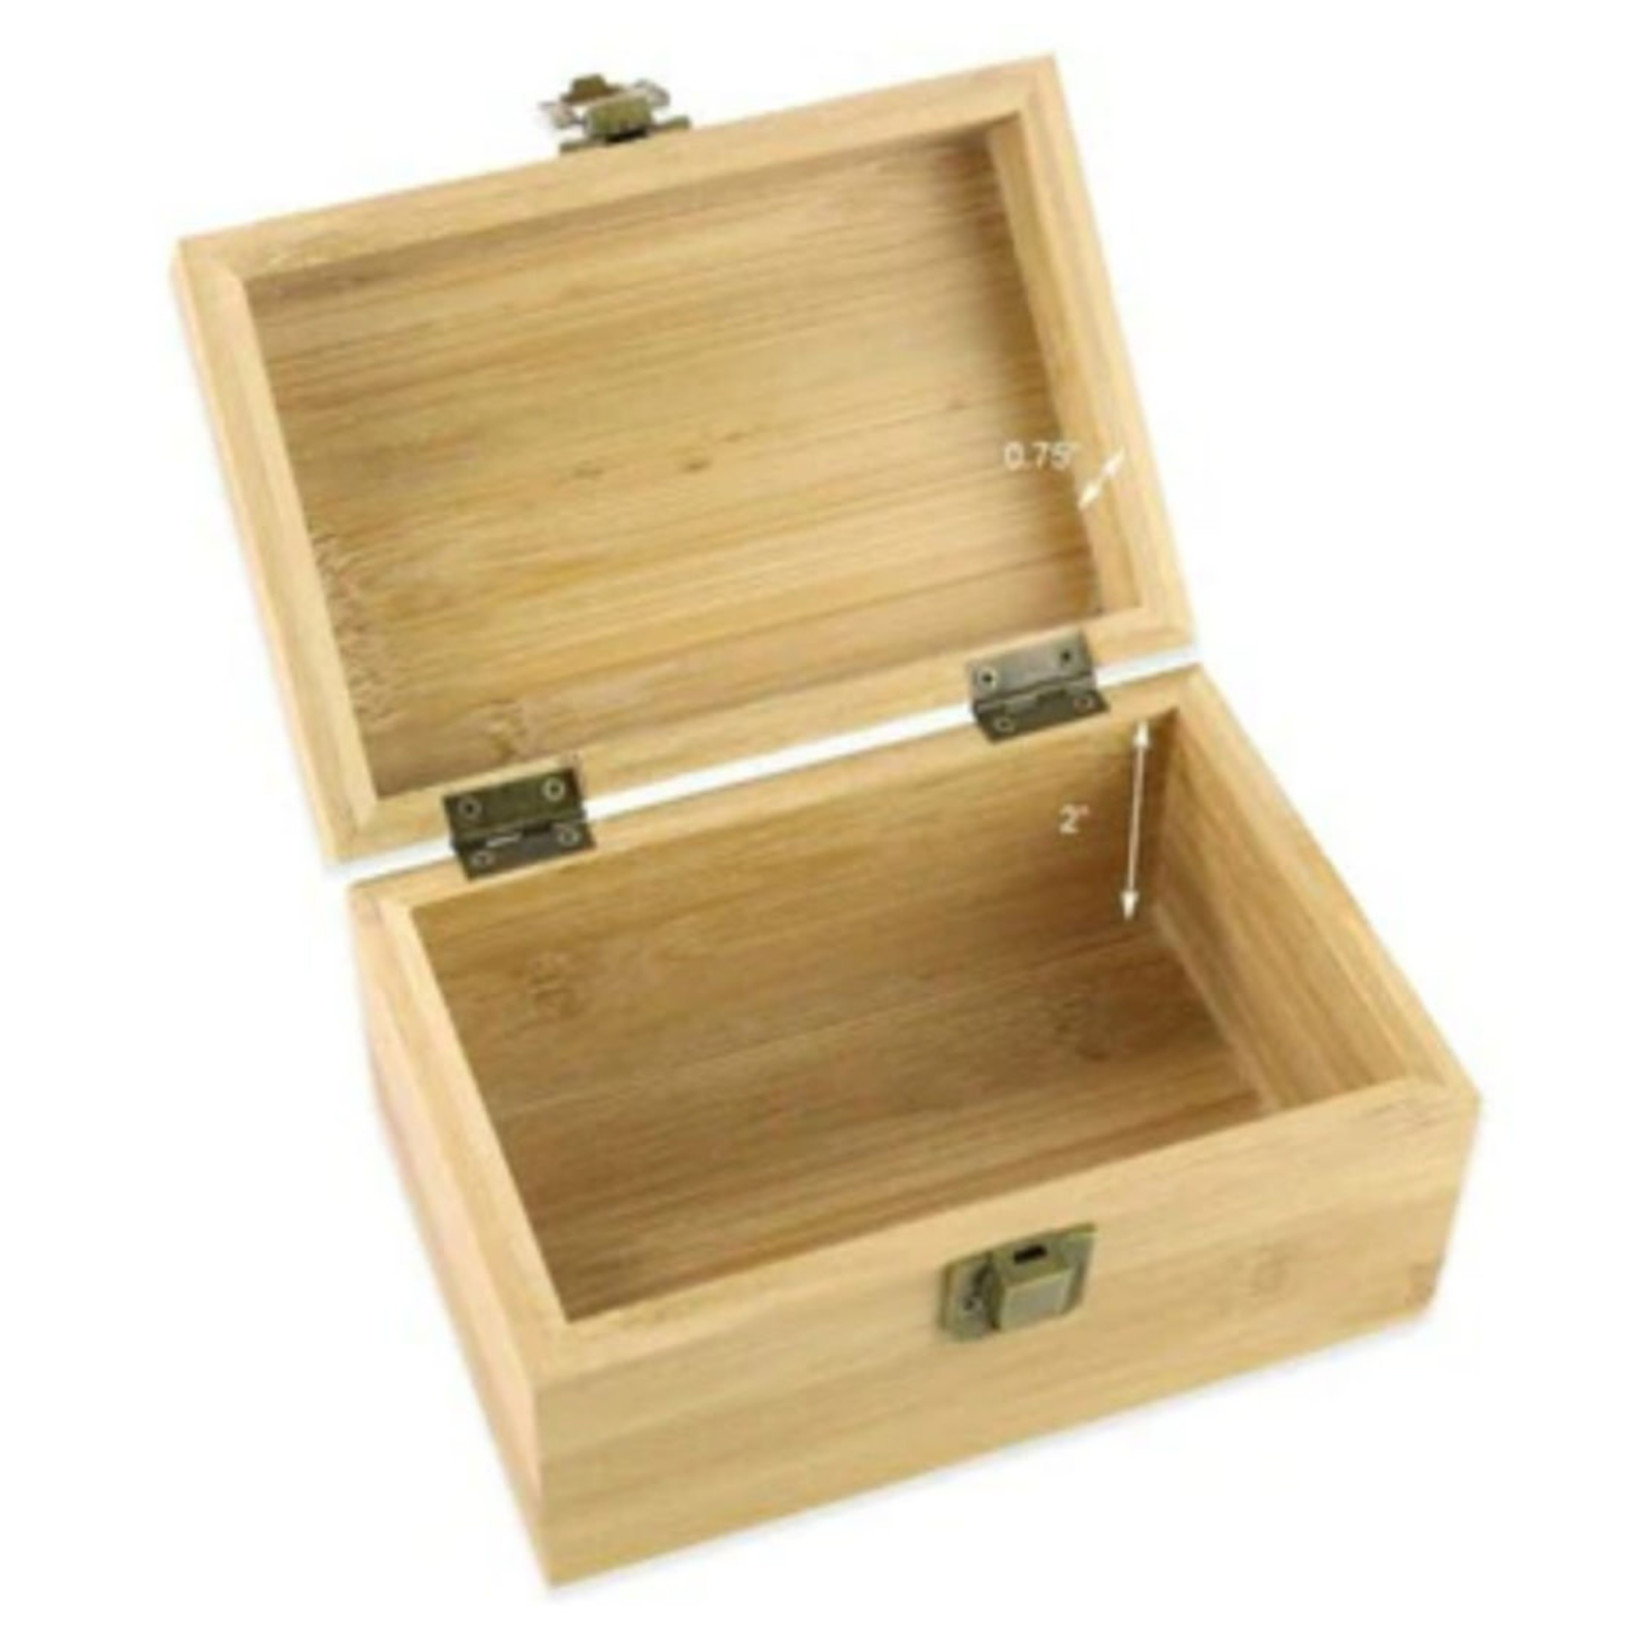 Never Xhale Never Xhale - Bamboo Stash Box w/ Latch - Small